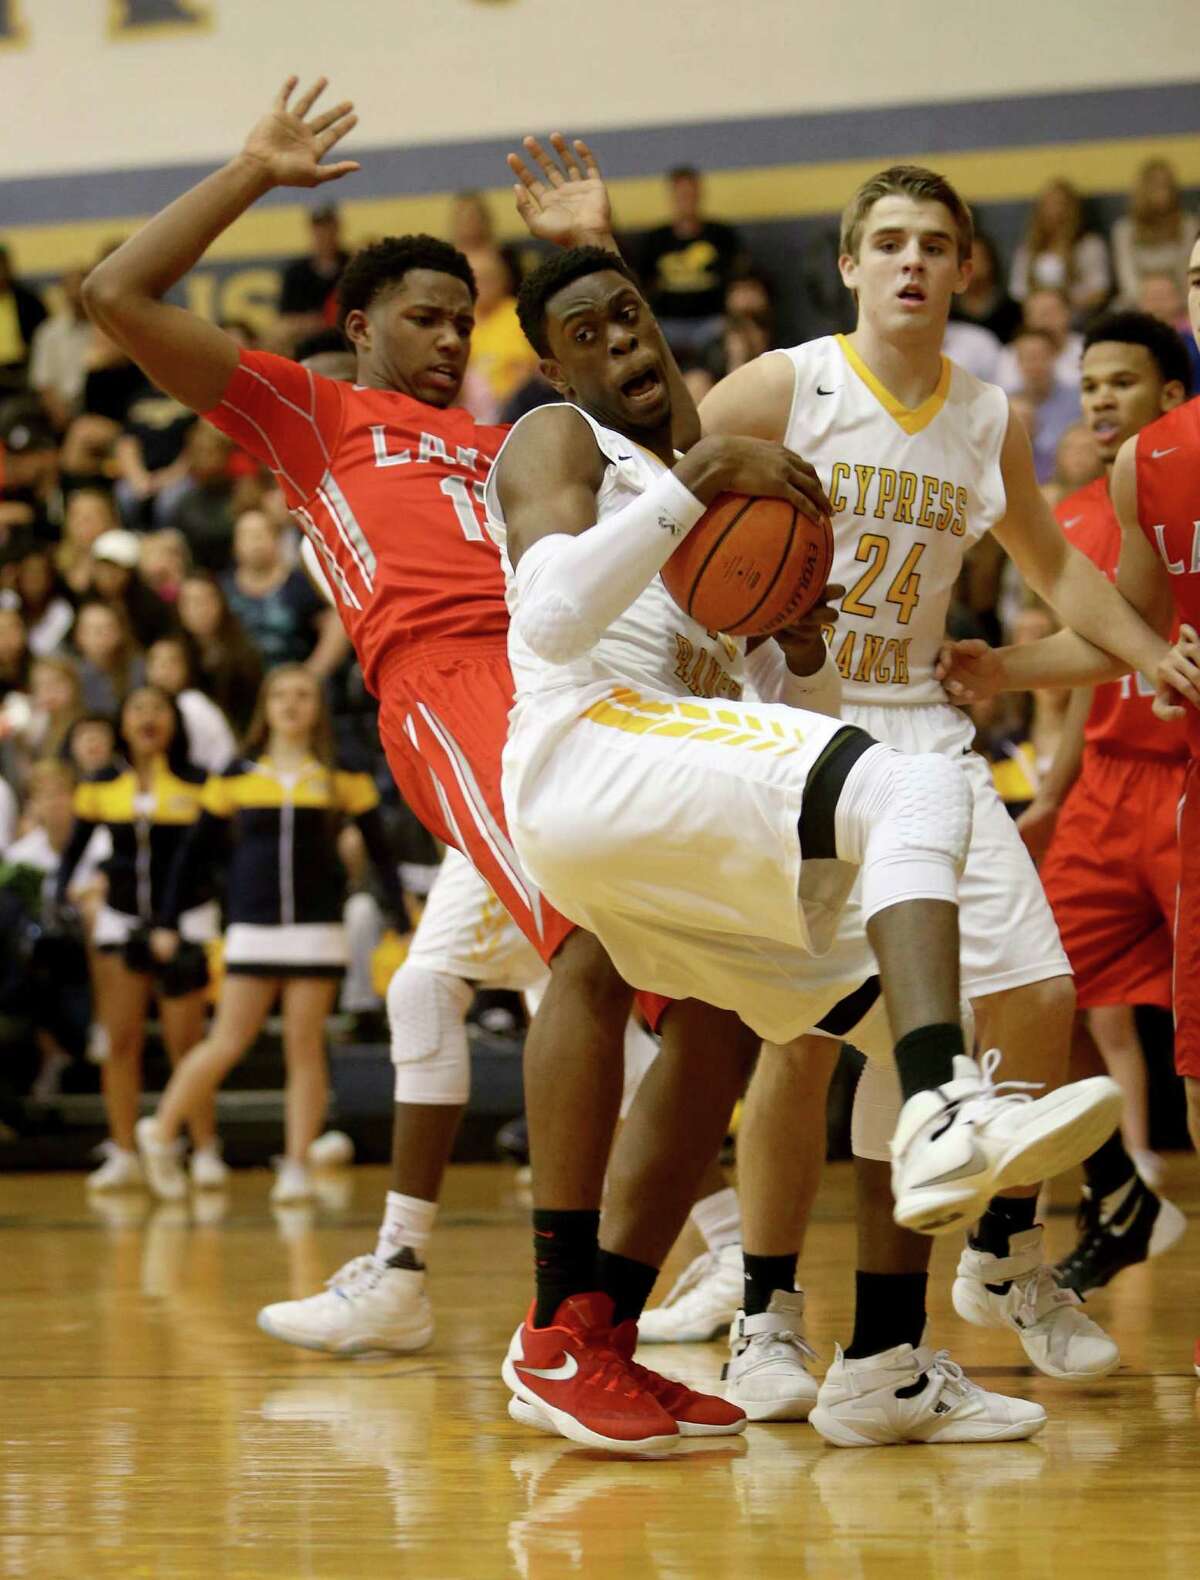 Anthony Agu (40), of Cypress Ranch, grabs a rebound in front of Jared Garcia (13), of Cypress Lakes, during the first quarter at Cypress Ranch High Friday, Jan. 29, 2016, in Cypress, Texas.